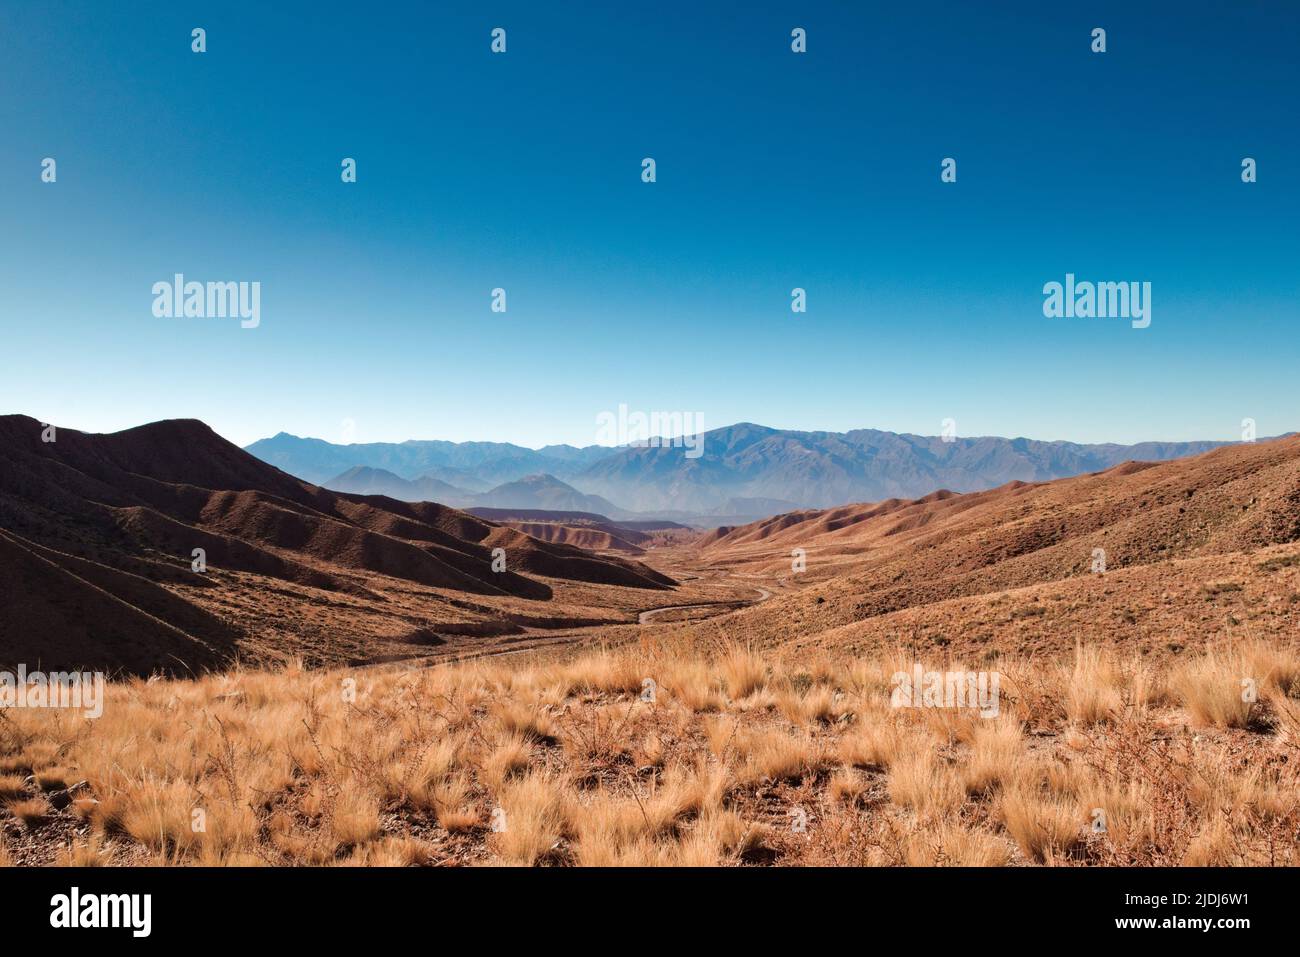 Arid grassy steppe by the Andes mountains near Tupungato, province of Mendoza, Argentina. Stock Photo